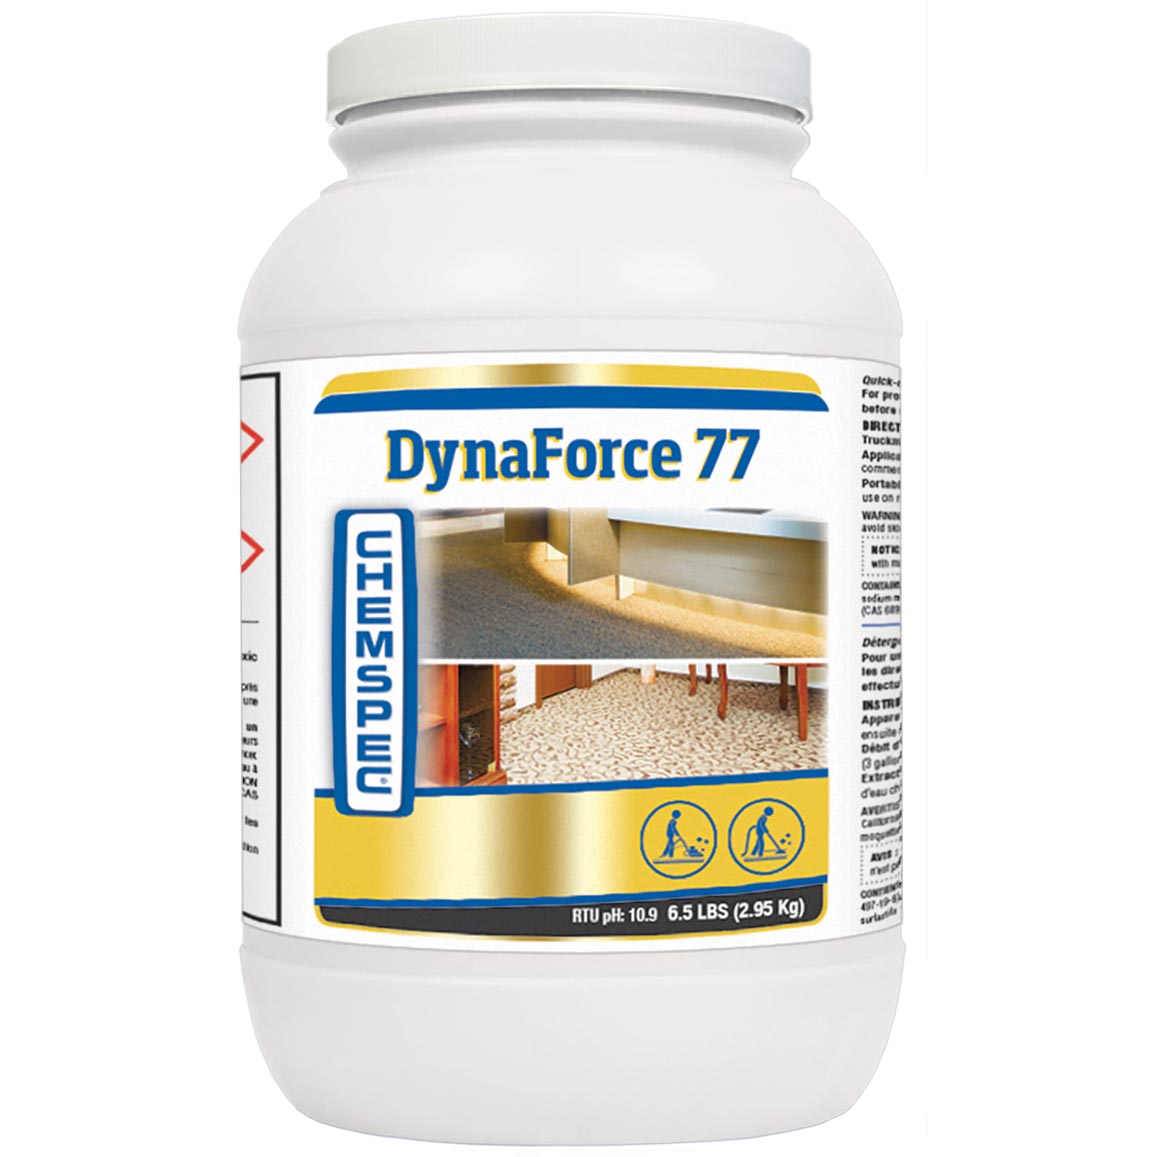 Chemspec C-DF1G DynaForce 77 Concentrated Carpet Cleaning Detergent Sapphire Scientific CC203A  1 Gallon 6.5 lbs Powder UPC 091965138624